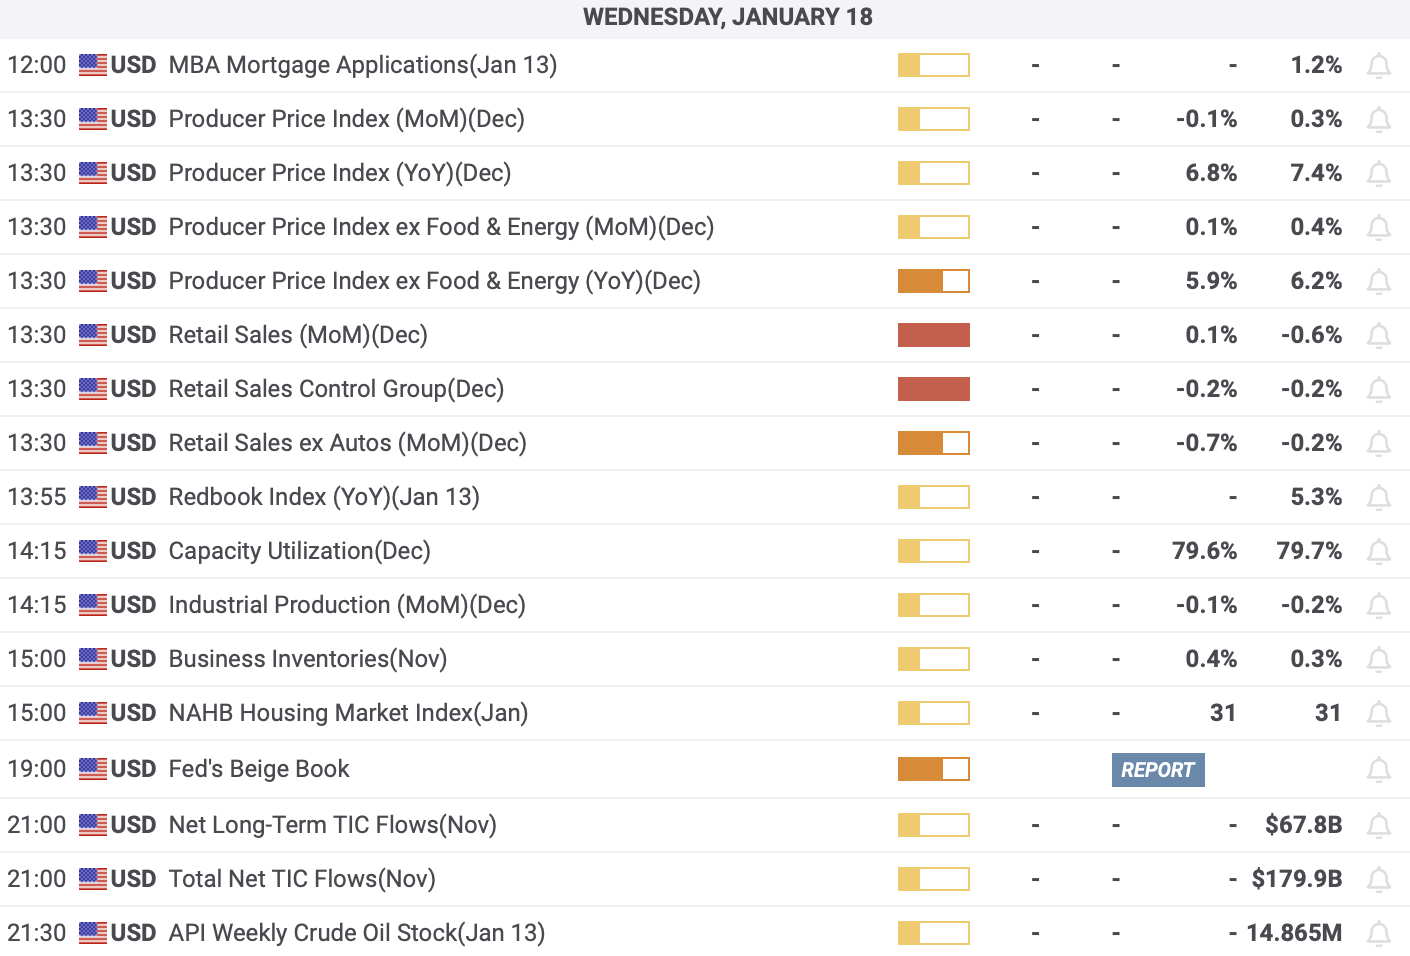 Important US economic data releases expected on Wed